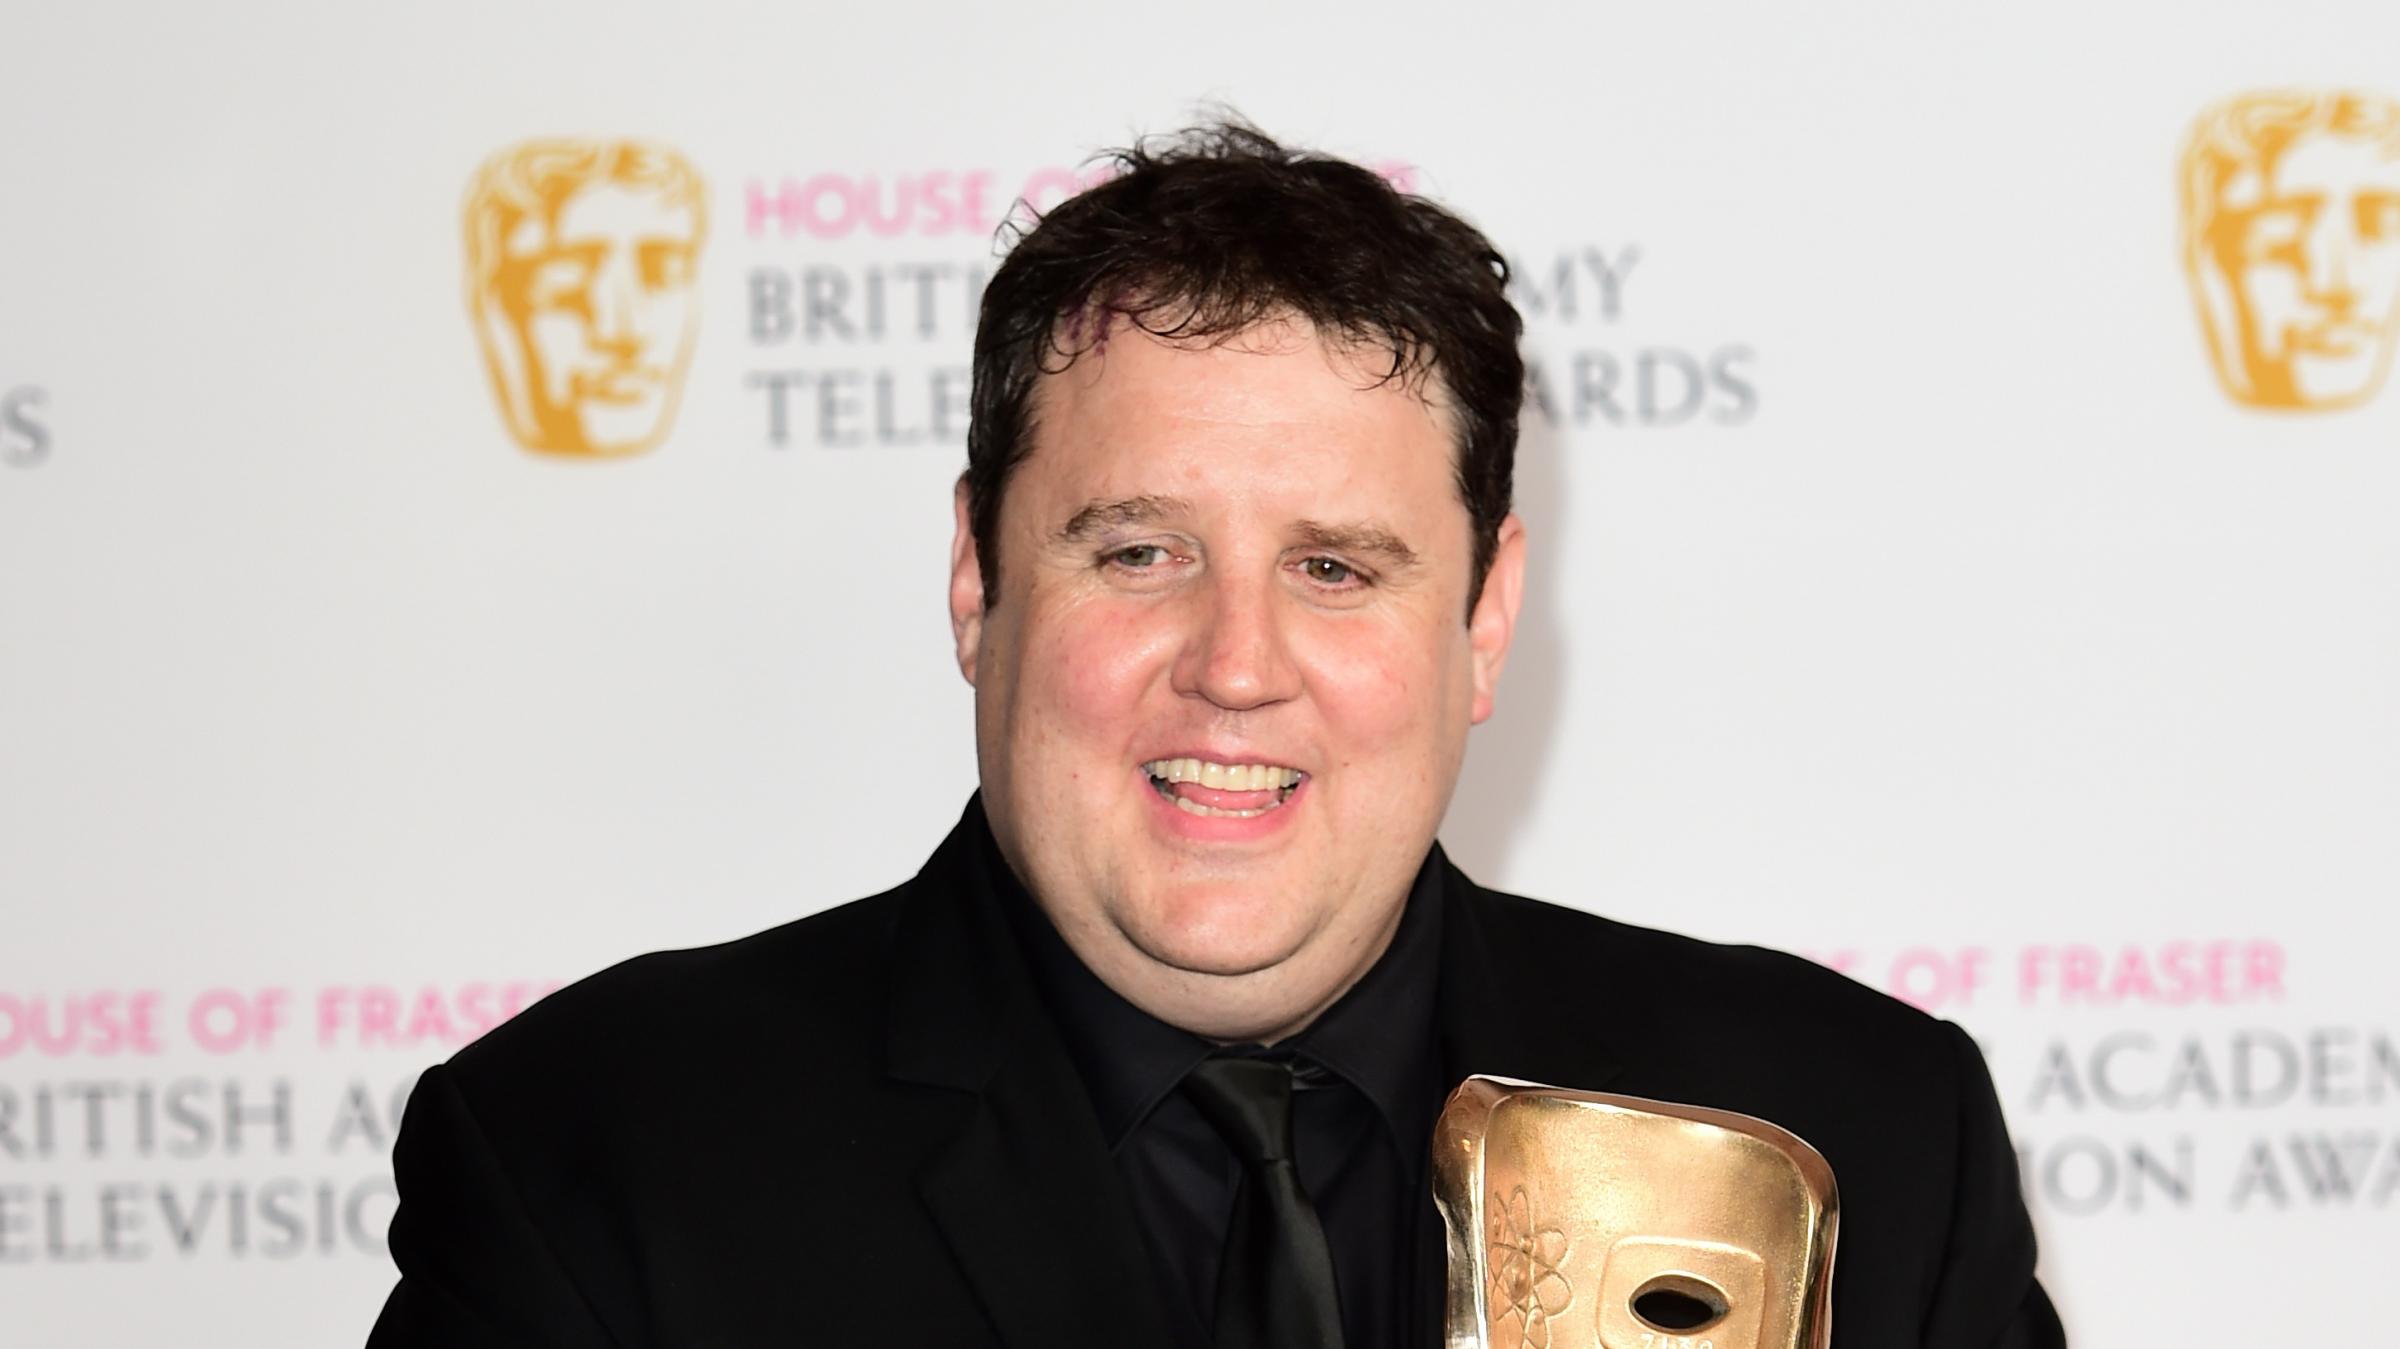 Peter Kay's special Car Share event will boost funds for Comic Relief